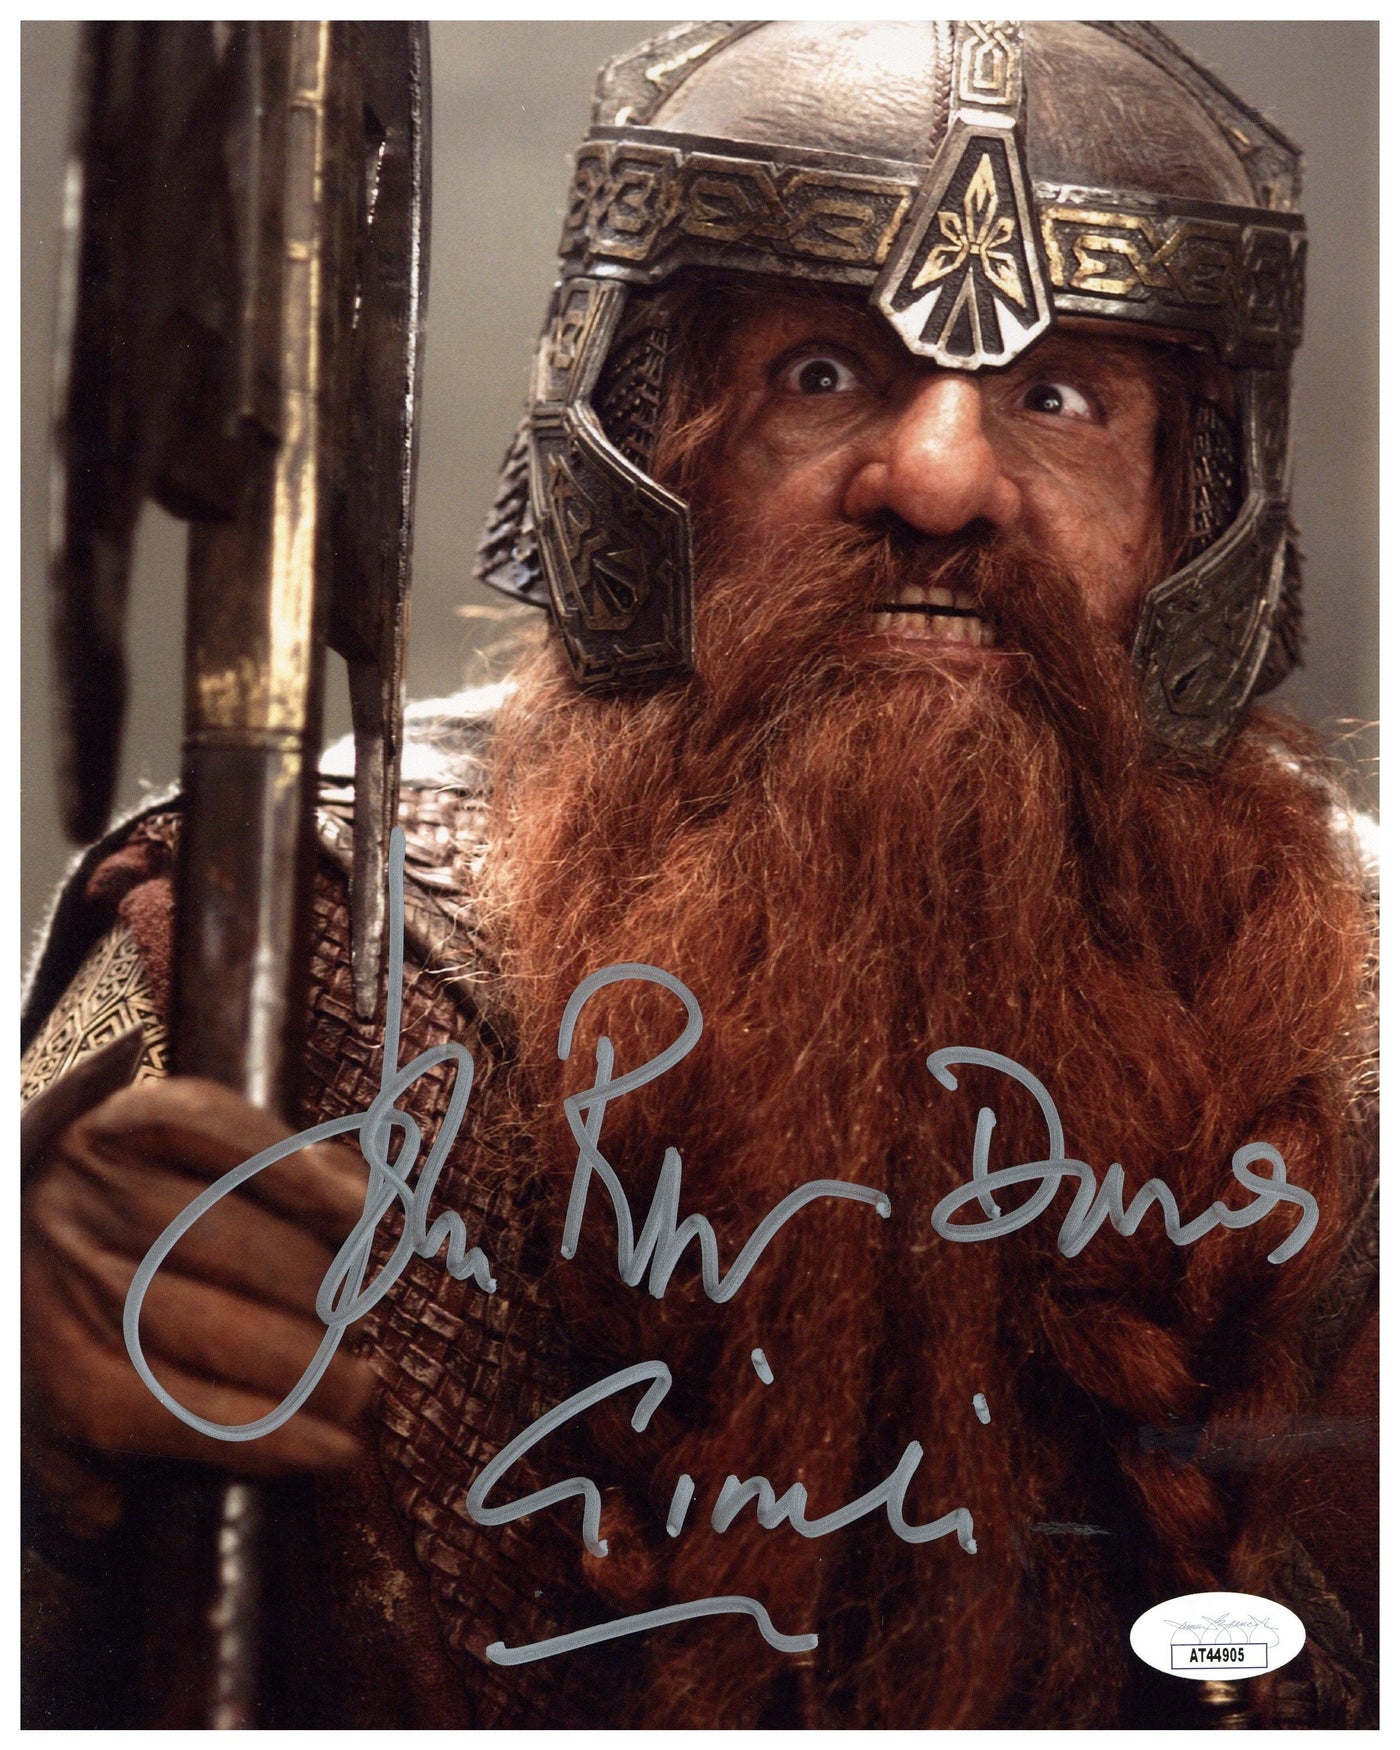 JOHN RHYS DAVIES SIGNED 8X10 PHOTO LORD OF THE RINGS AUTOGRAPHED JSA COA